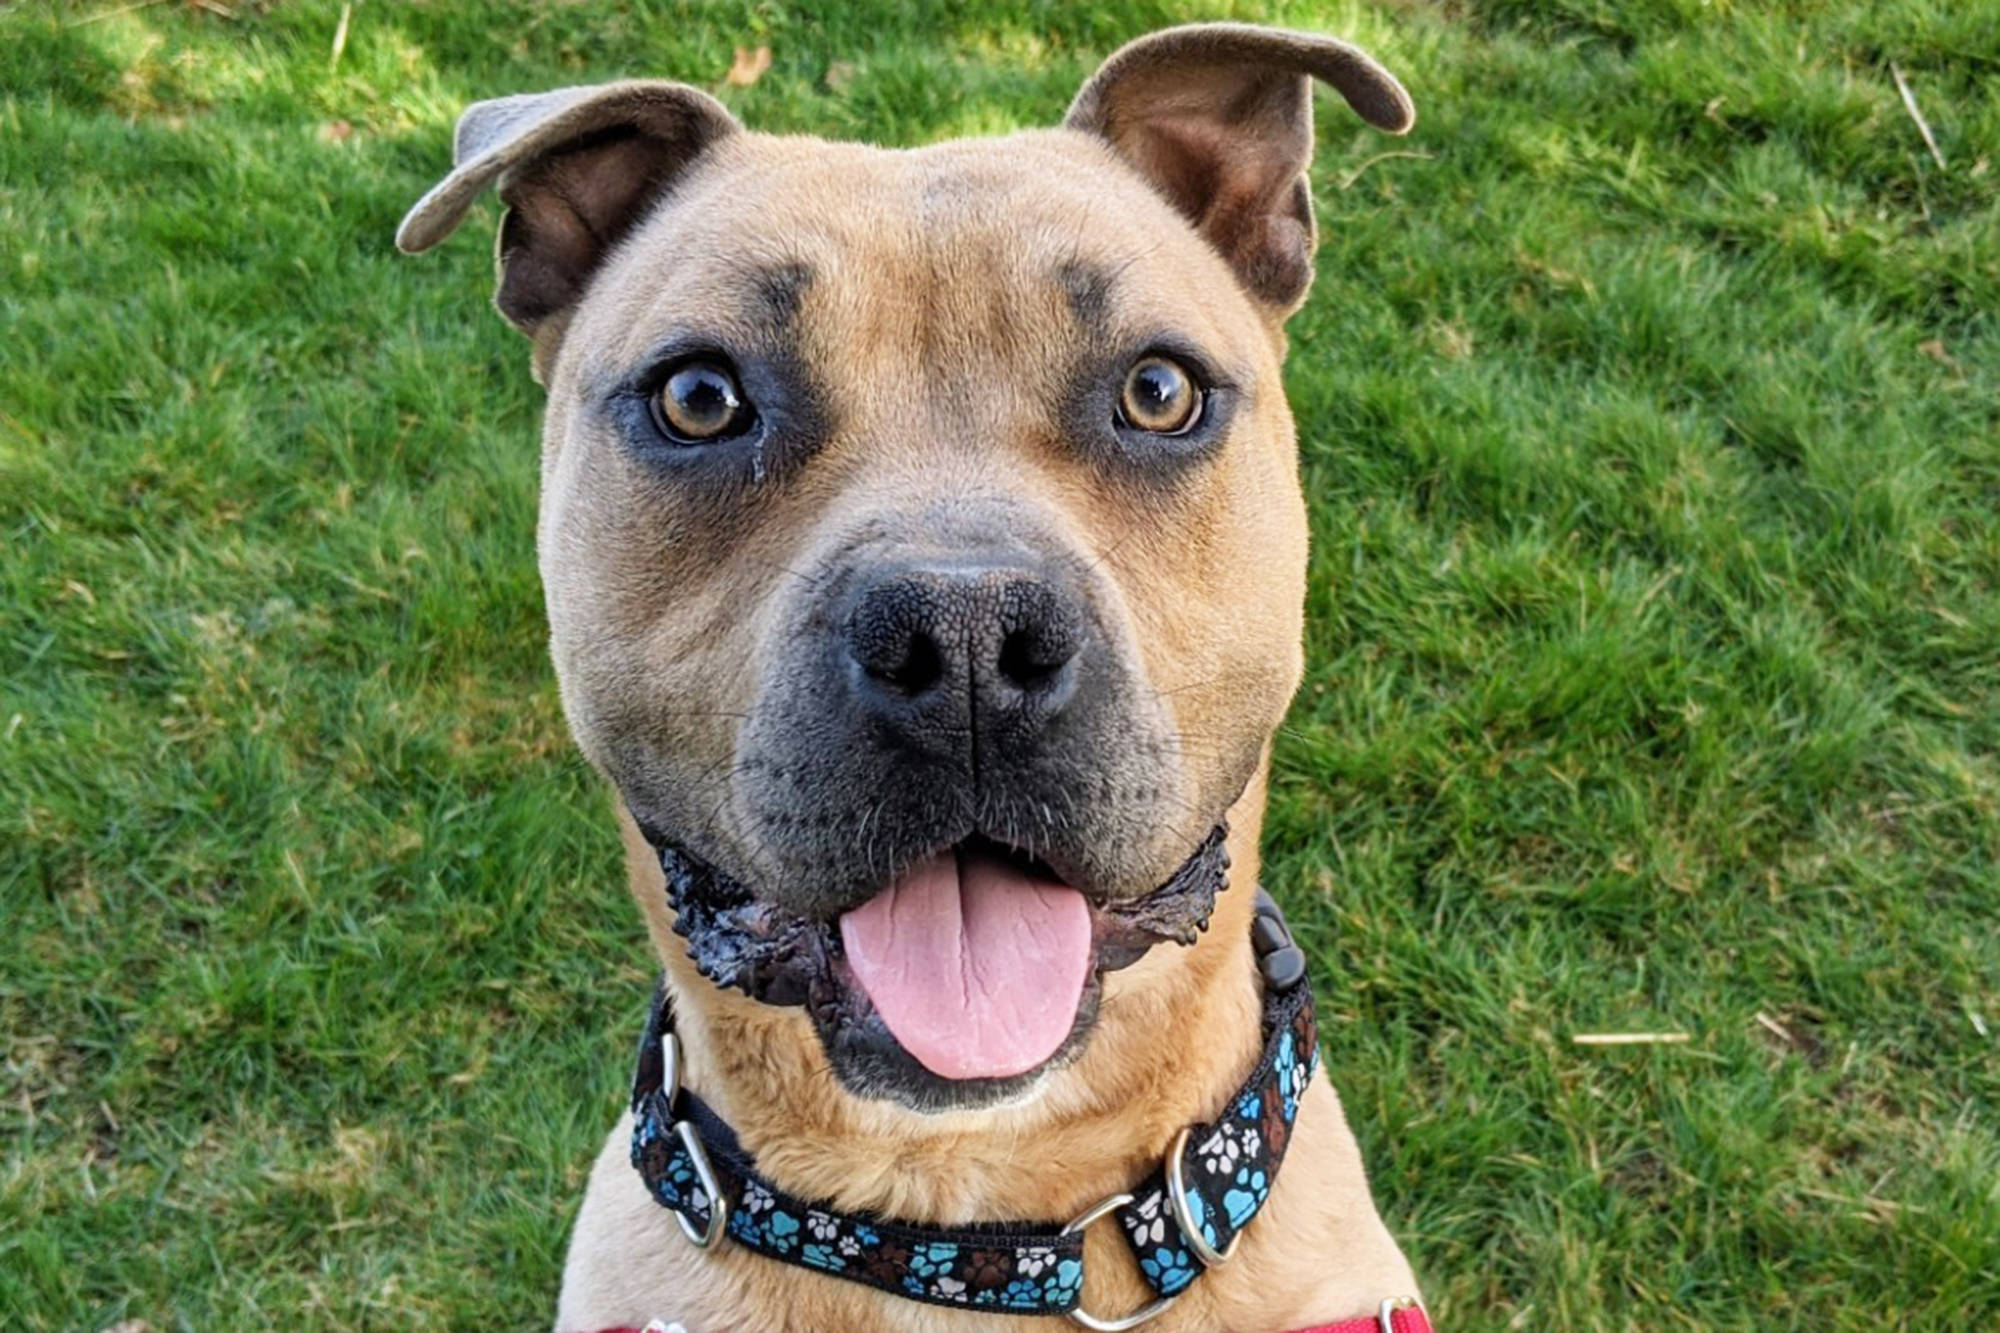 Kong, whose handsome face was shared in a Friday, April 1, post on the BC SPCA Facebook page, is up for adoption at the Nanaimo branch. (BC SPCA/Facebook image)